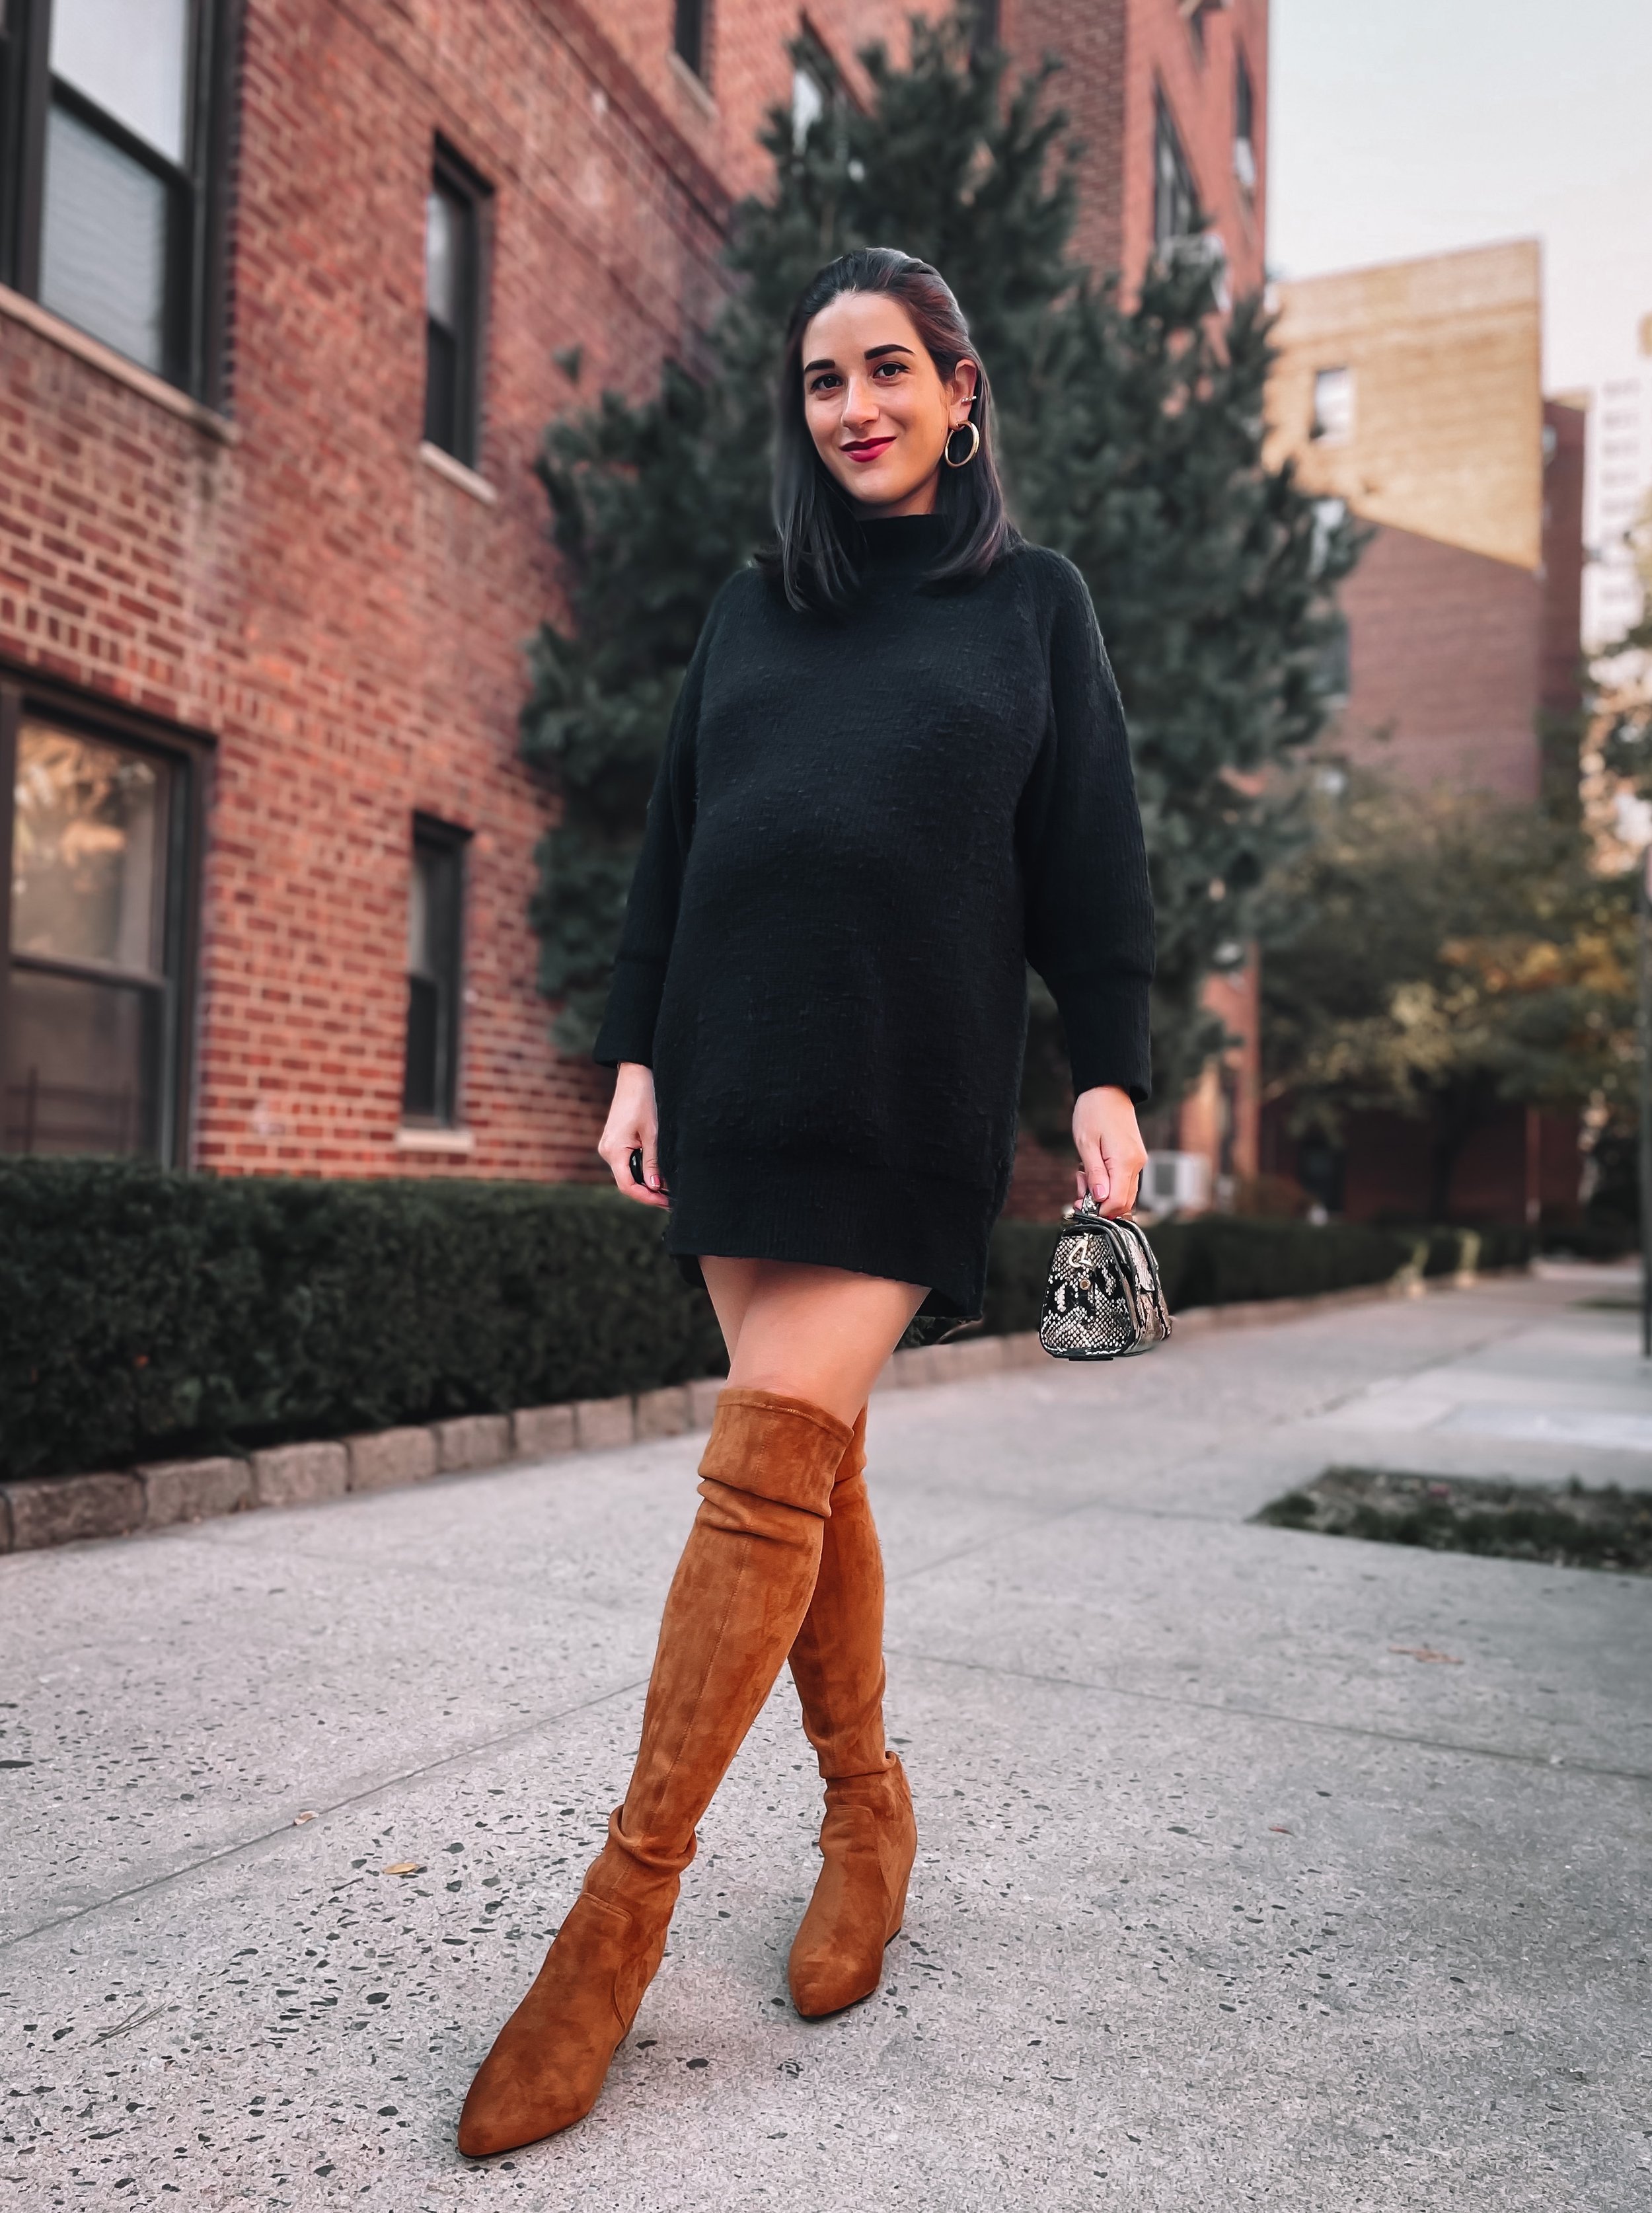 Black Sweater Dress Tan OTK Boots 39 Weeks Pregnant Esther Santer NYC Street Style Blogger Nordstrom Topshop Gold Hoop Earrings Over The Knee Boots Goodnight Macraoon Bump Friendly Pregnancy Fashion IVF Winter Strathberry Mini Bag Women  Expecting Mom.JPG